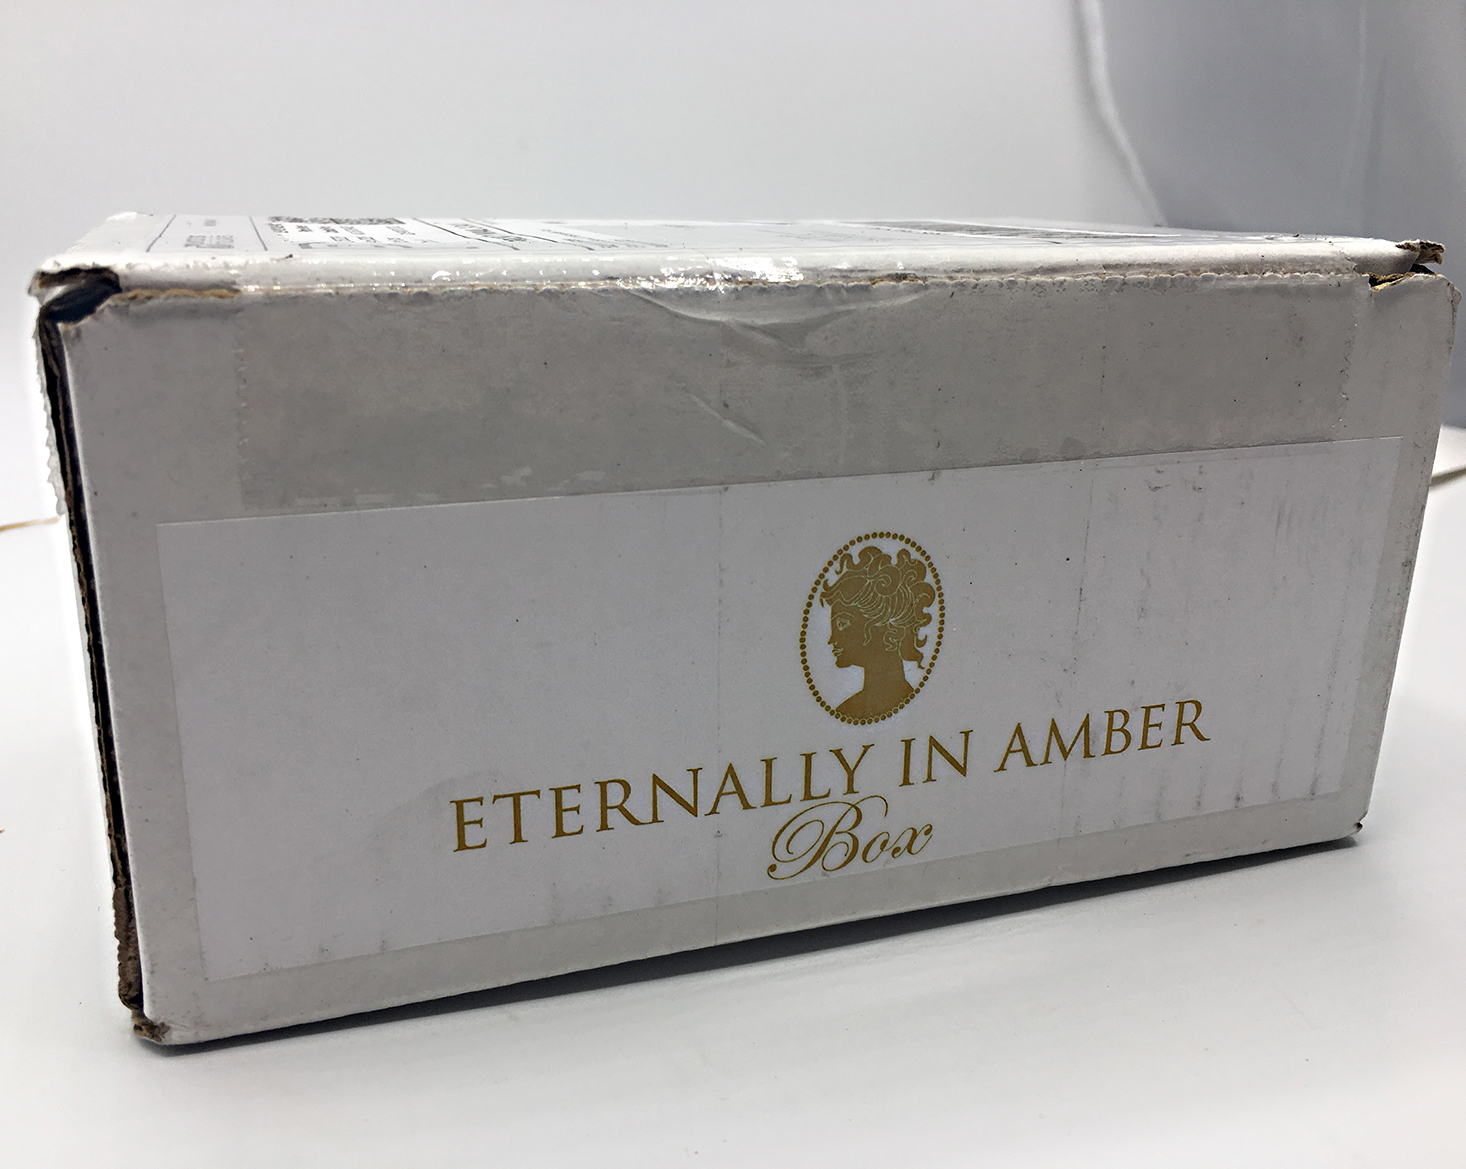 Eternally in Amber Box Review + Coupon- November 2016